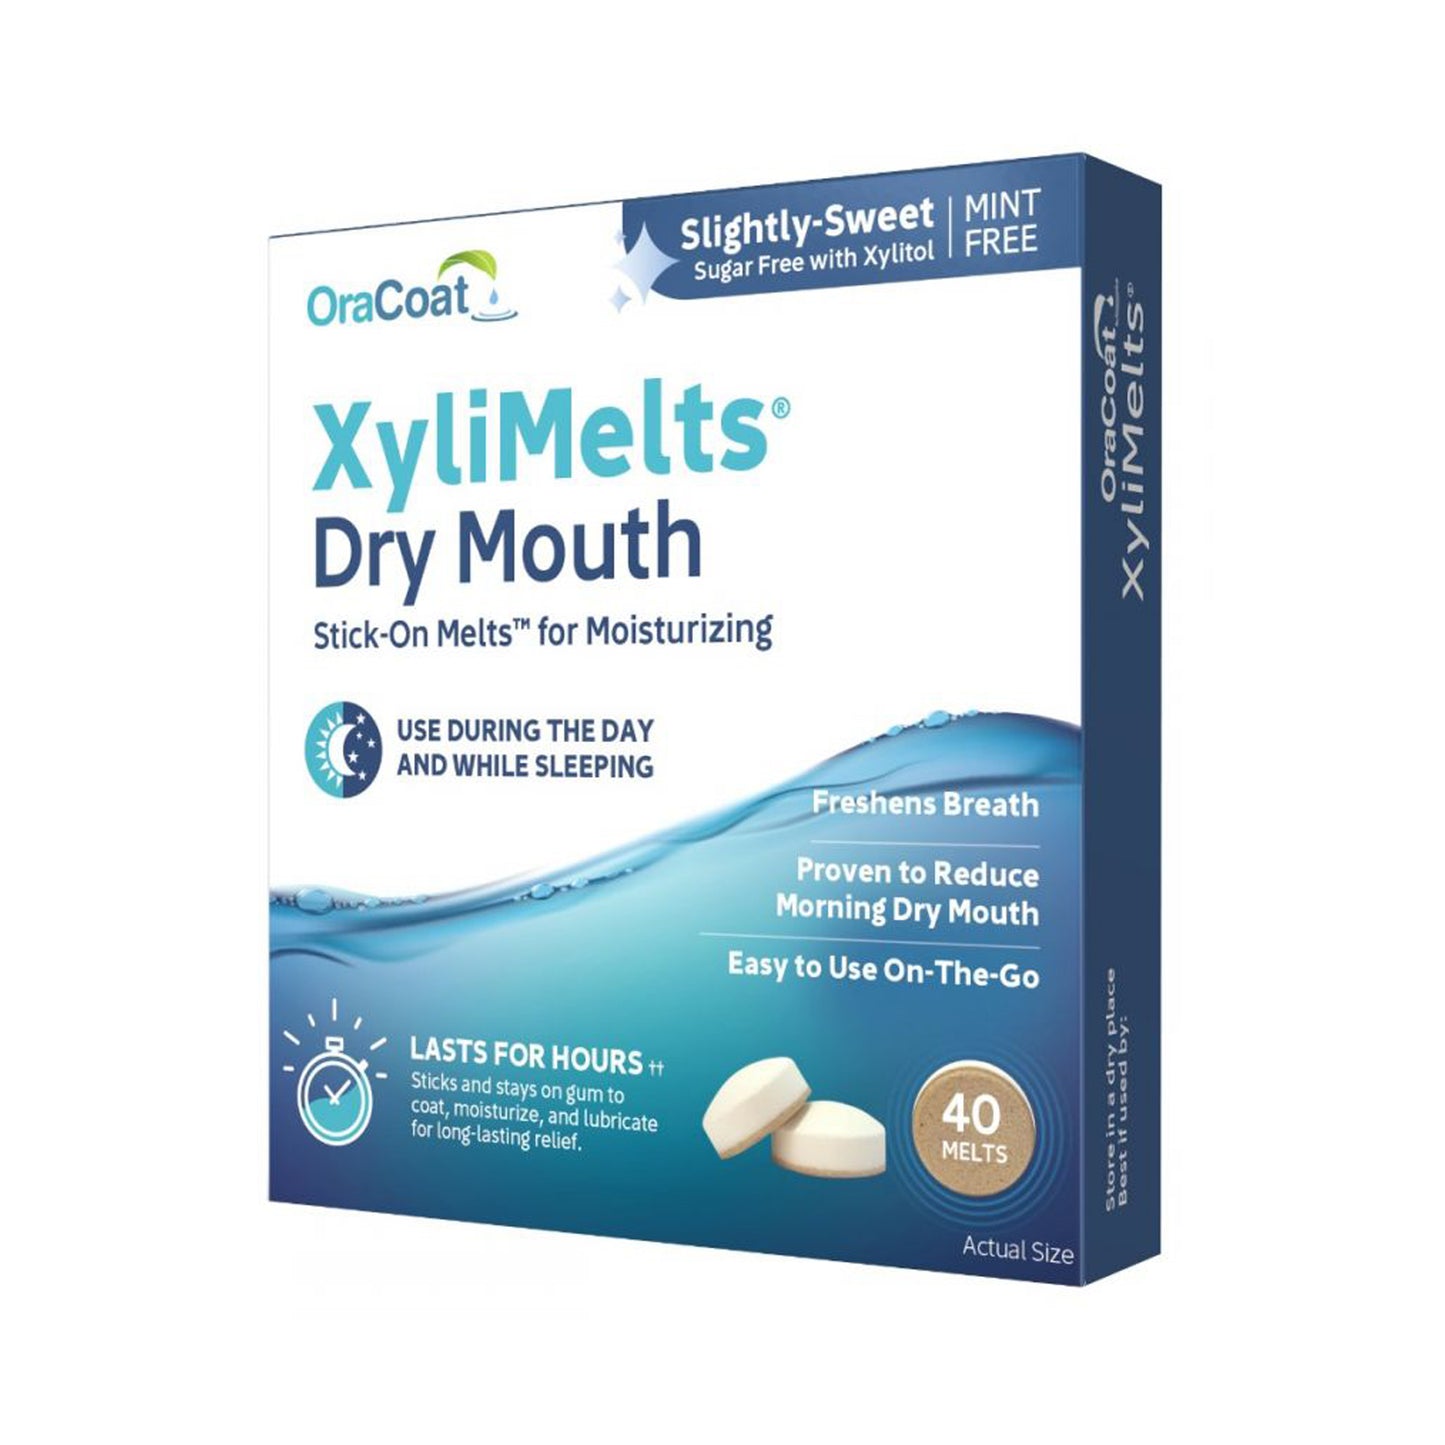 OraCoat XyliMelts for Dry Mouth Slightly Sweet 40 Melts